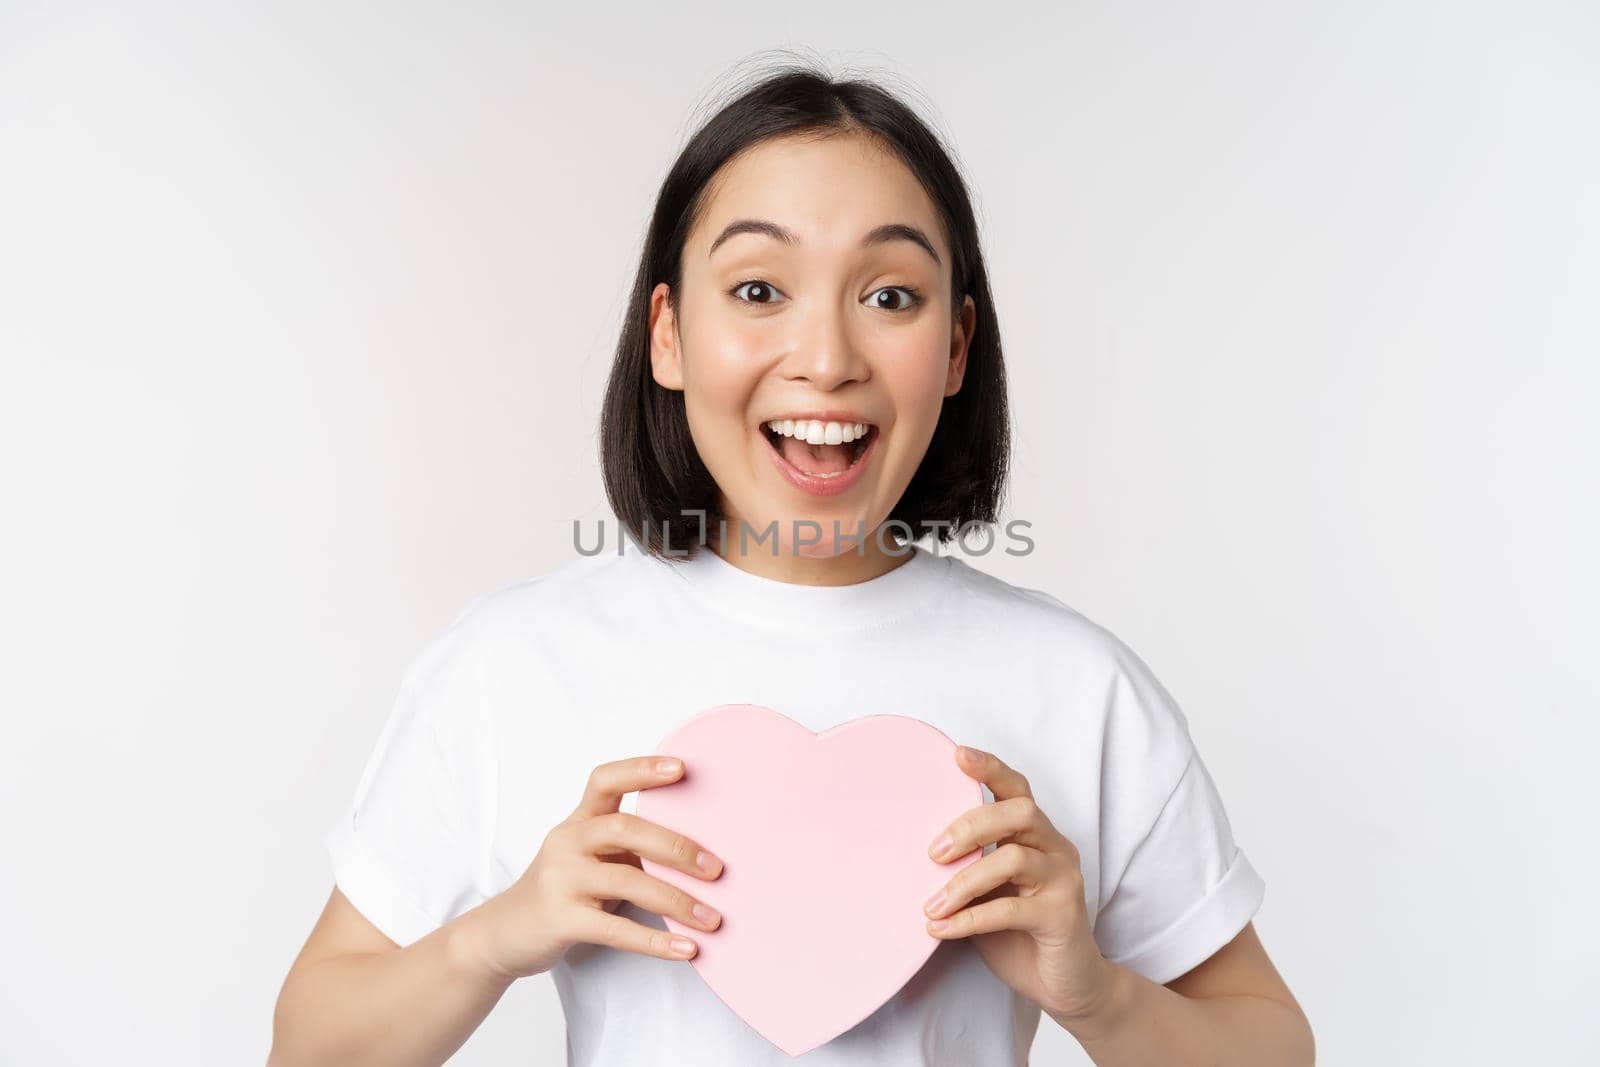 Valentines day. Happy asian girl receive romantic gift, holding heart shaped box and smiling excited, standing over white background.